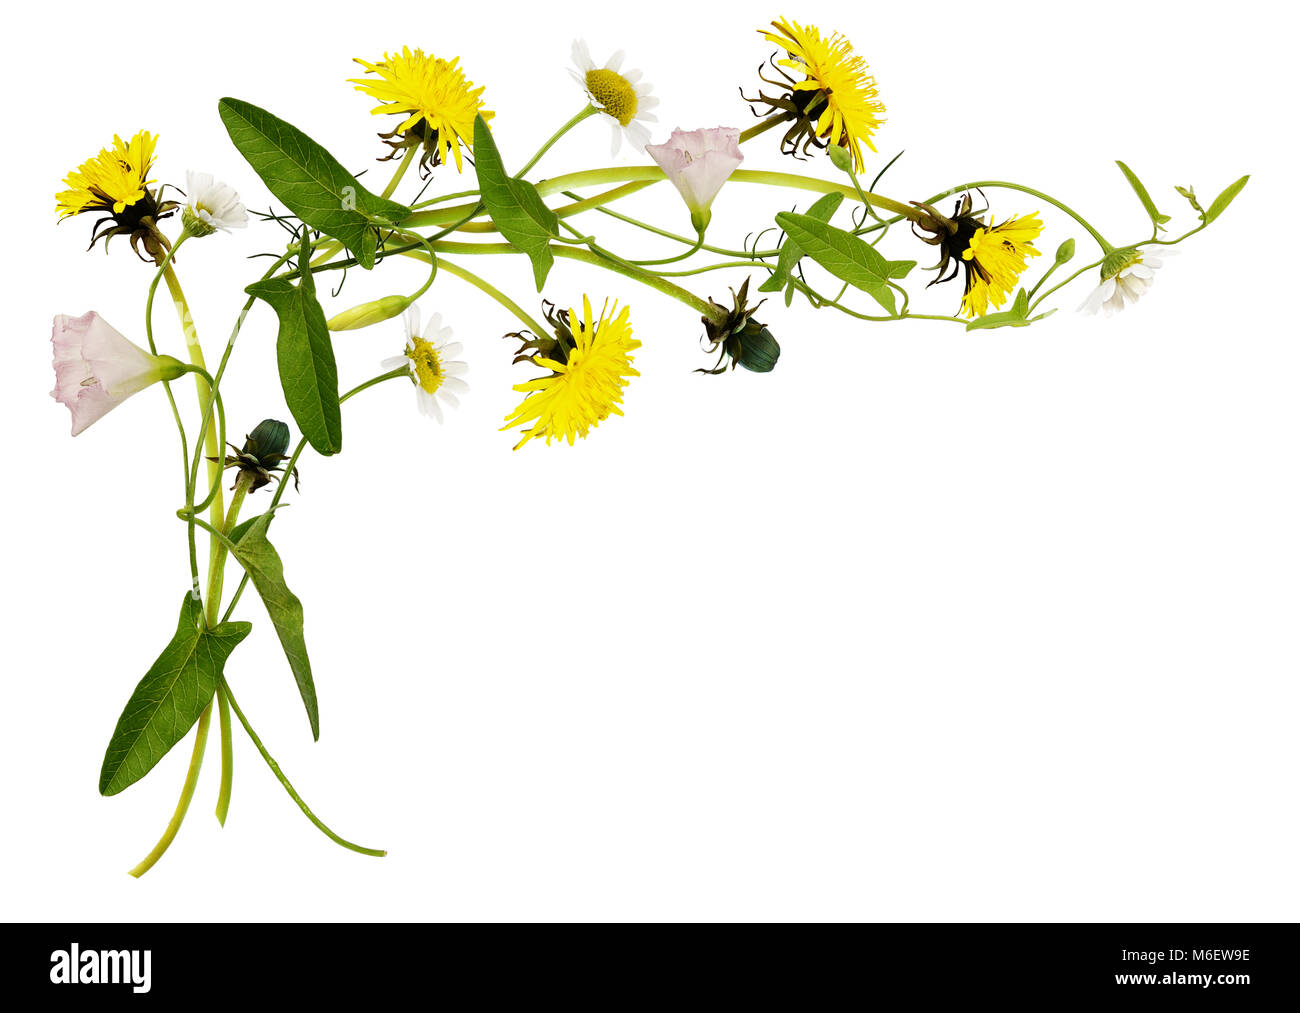 Bindweed, dandelion and daisy flowers and leaves in corner arrangement isolated on white Stock Photo